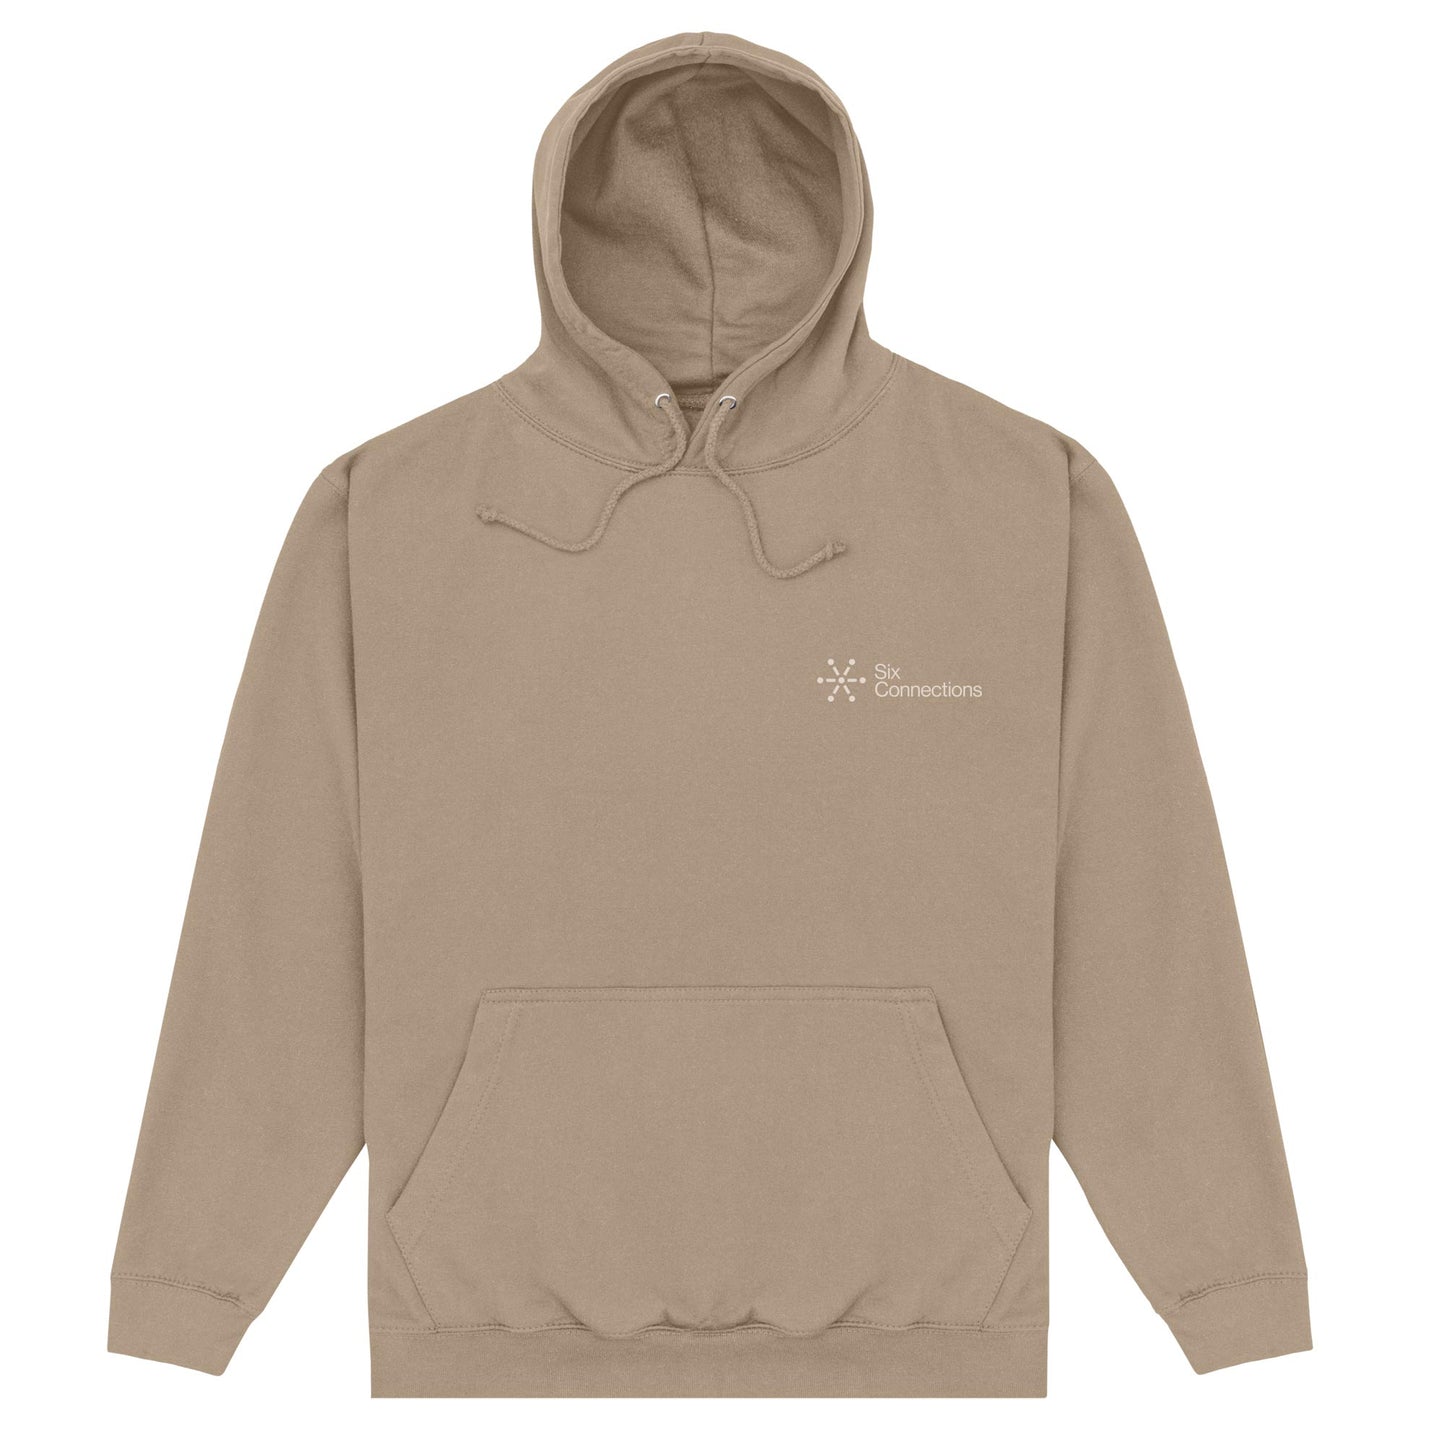 Six Connections Hoodie